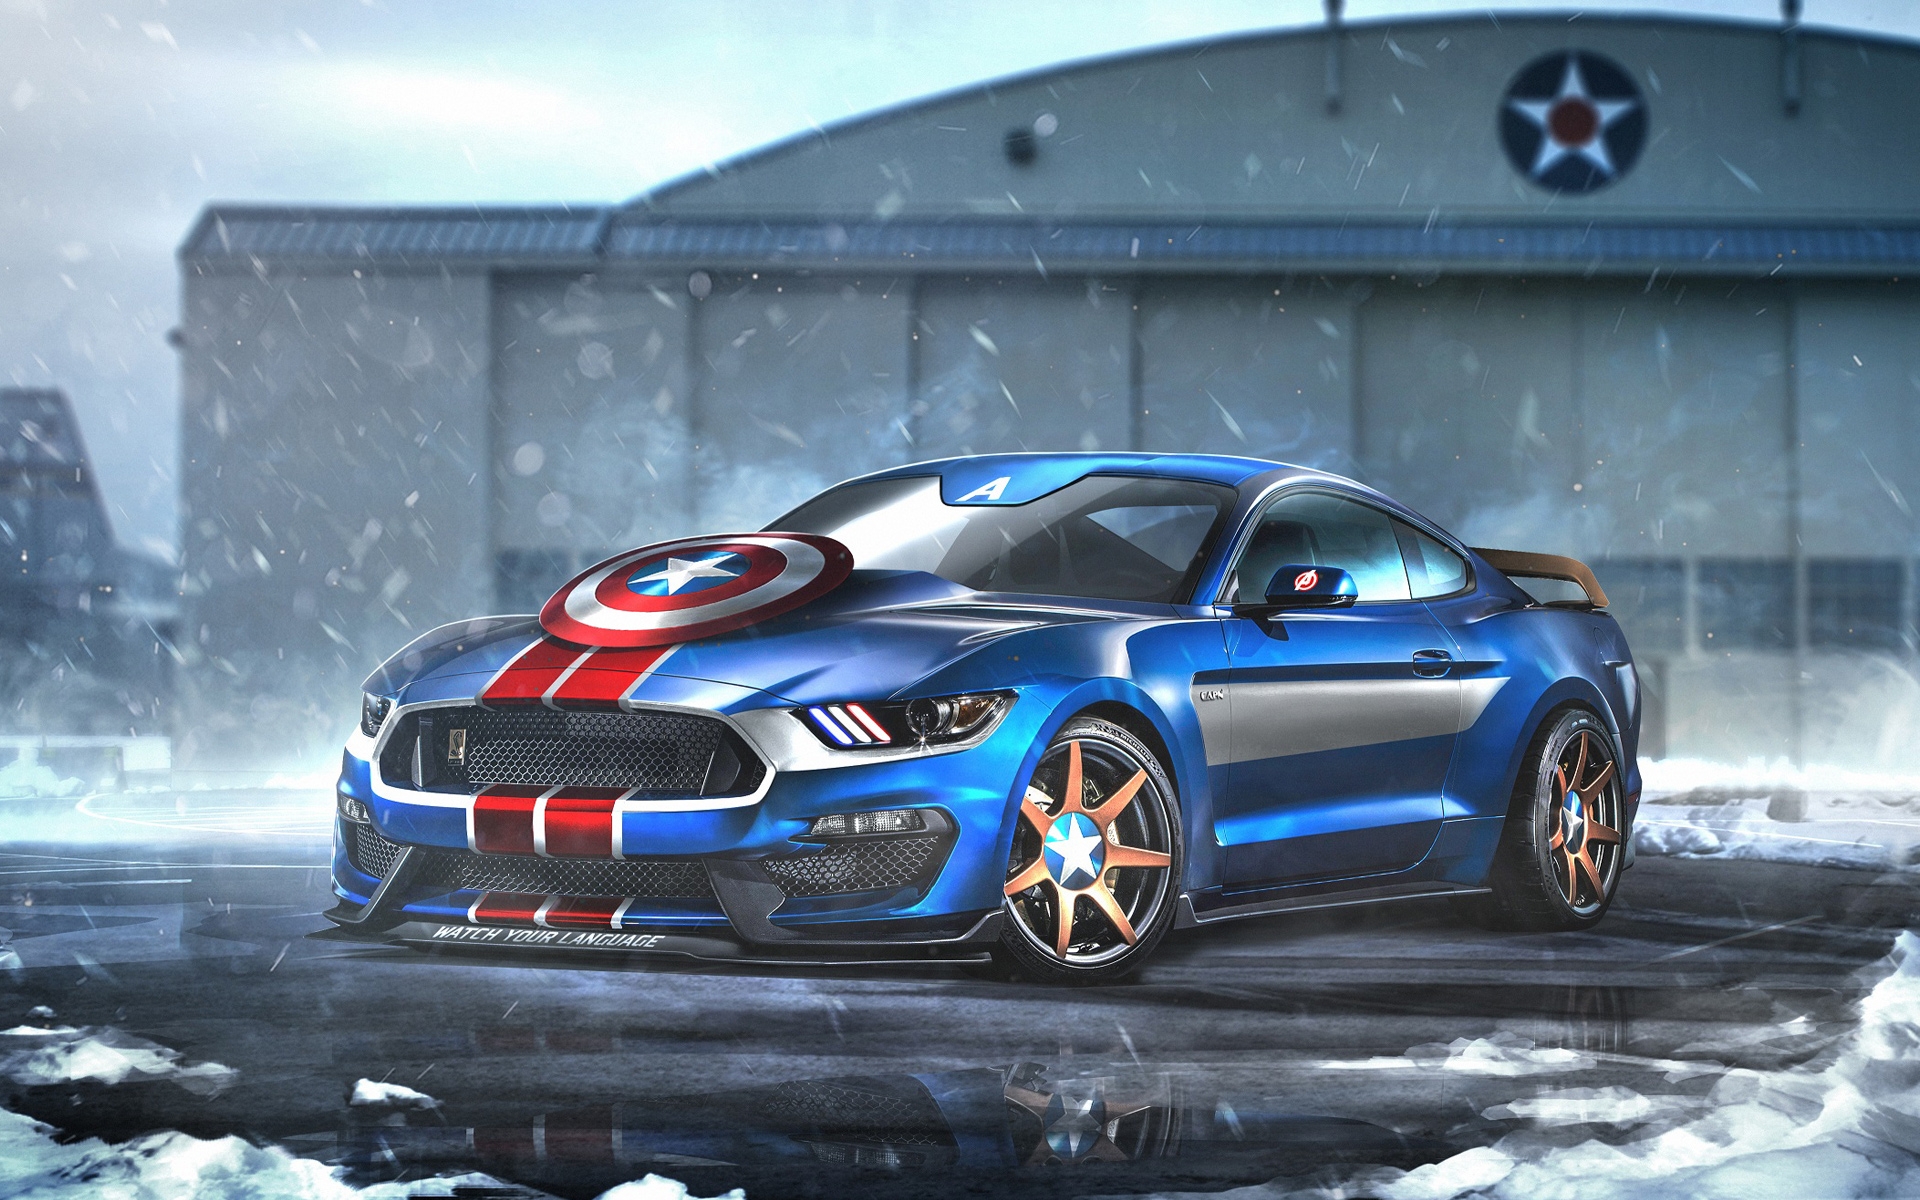 A Ford mustang in the style of captain america.